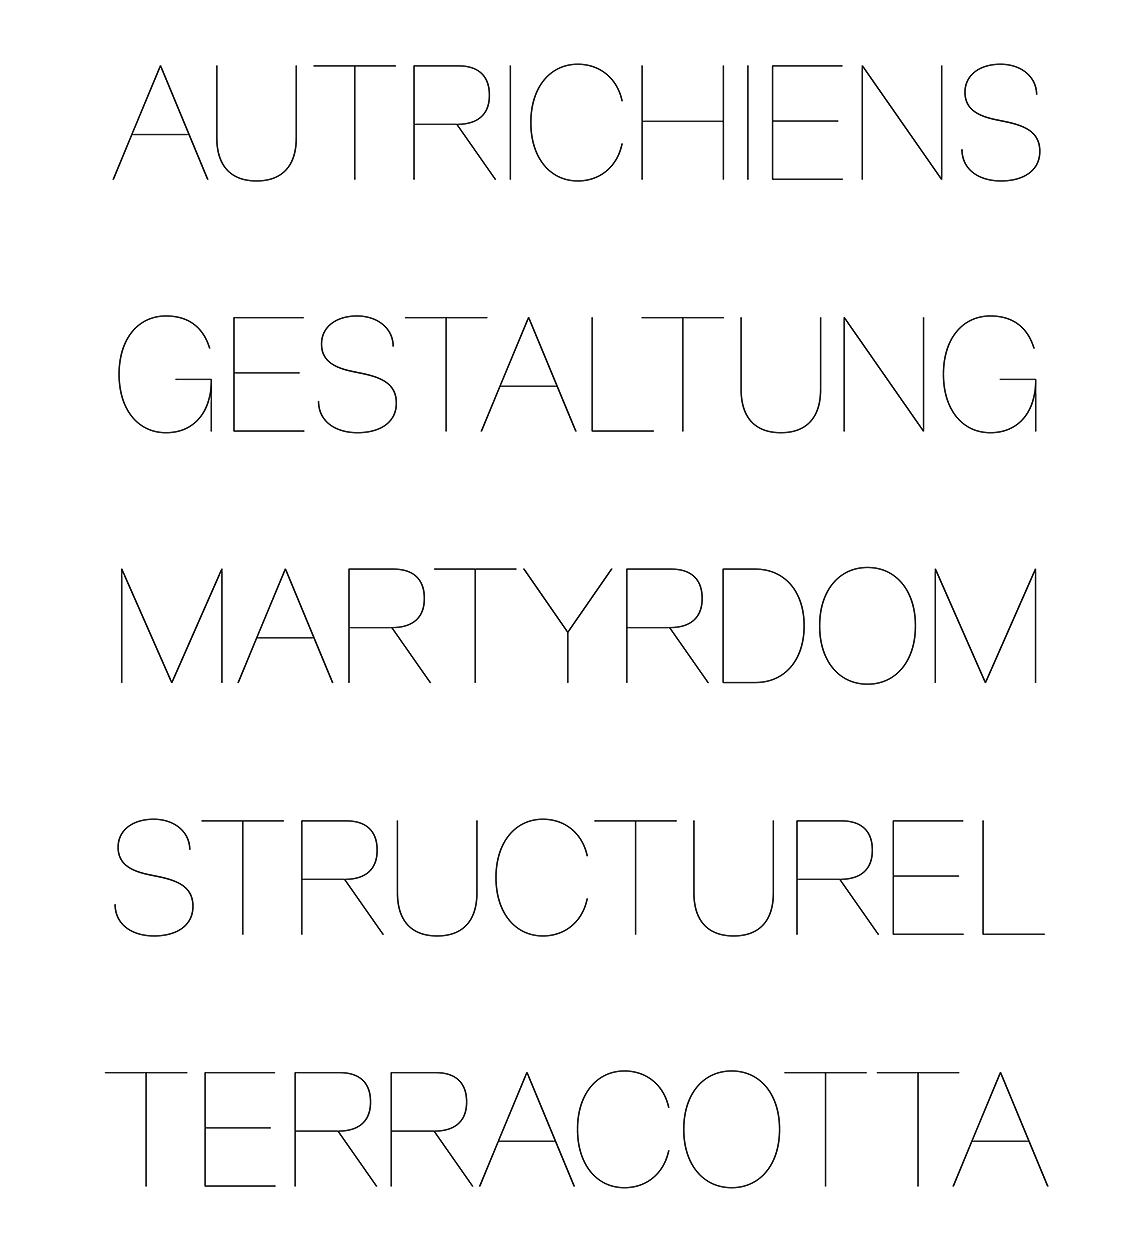 aesthetic font names